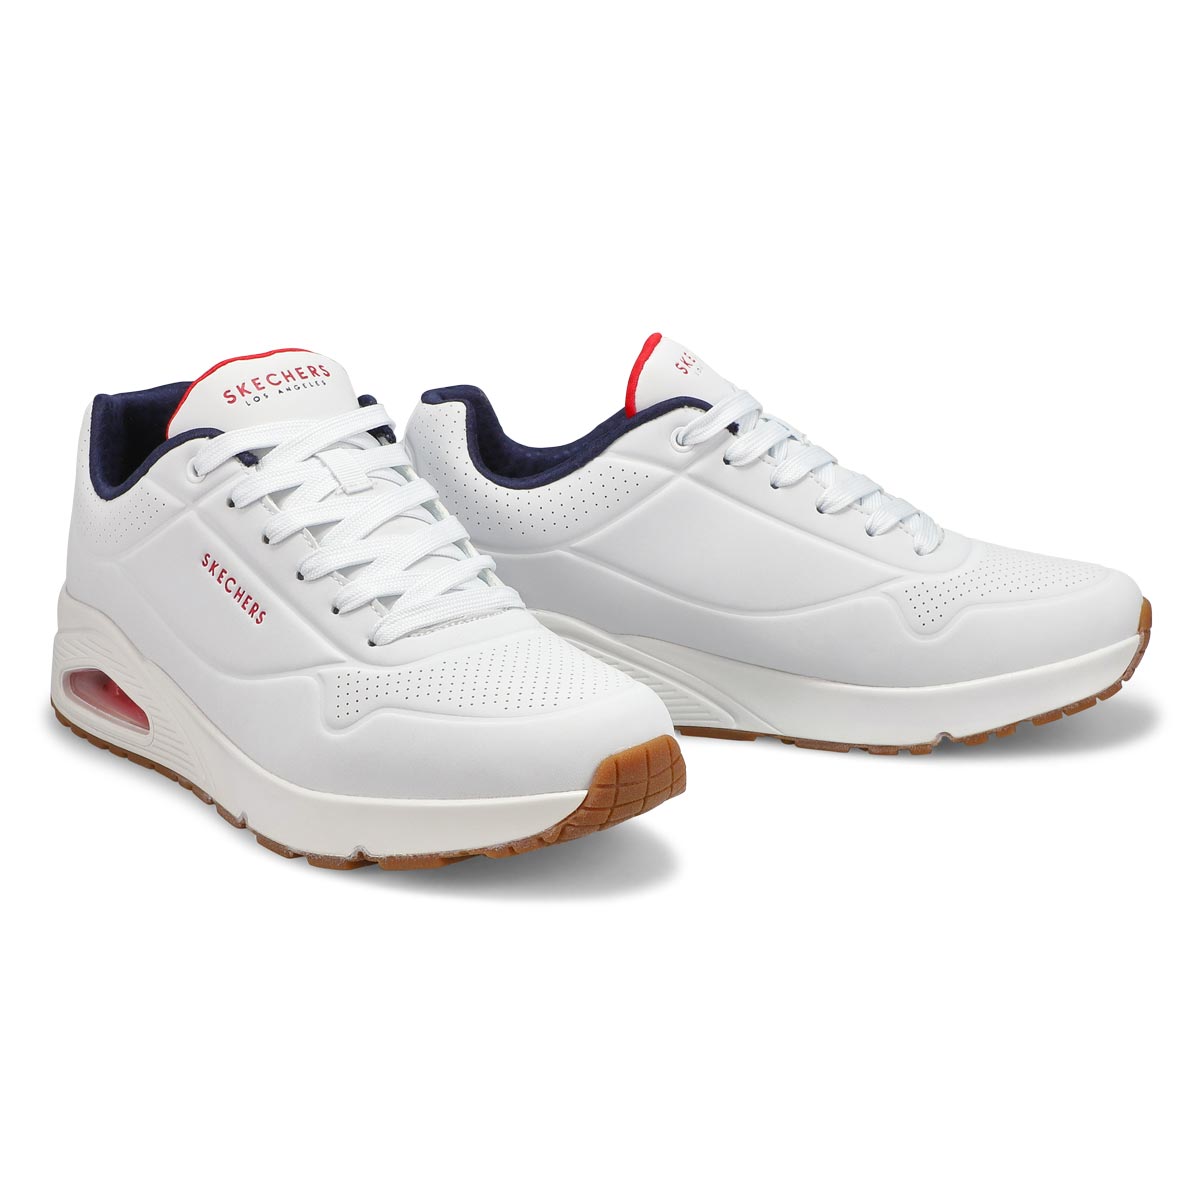 Men's Uno Stand On Air Sneaker -White/Navy/Red